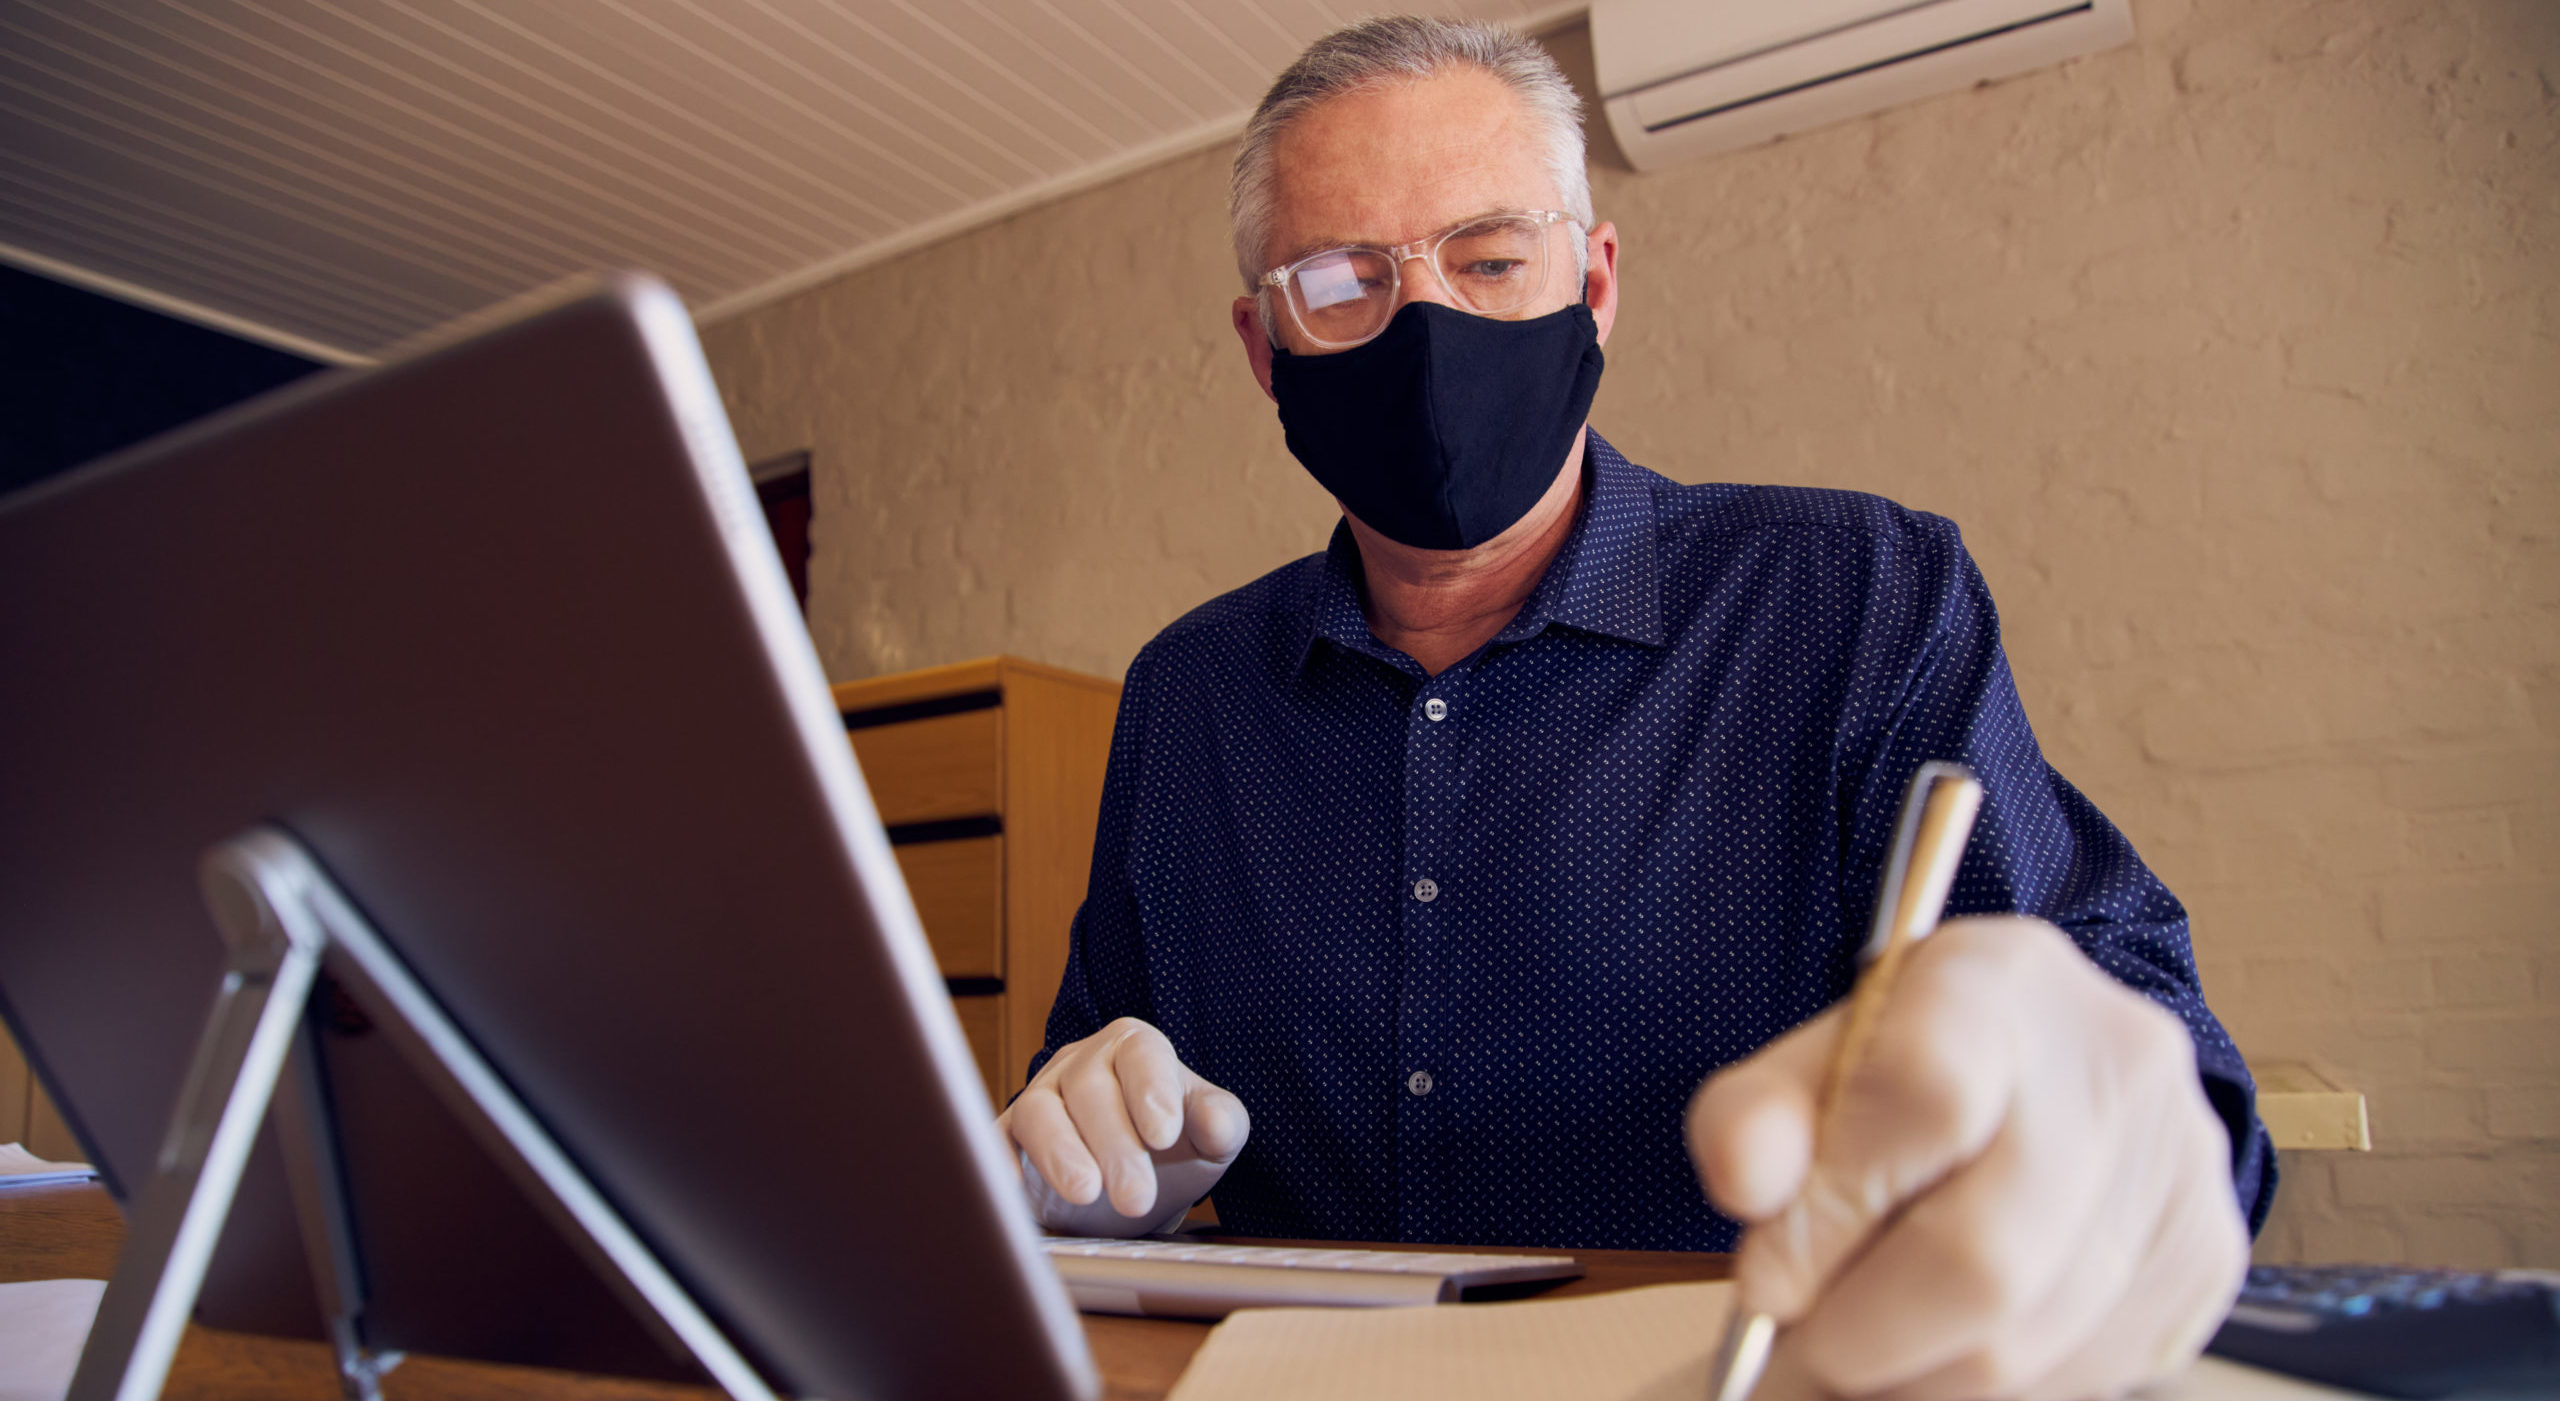 Businessman working at desk wearing a face mask